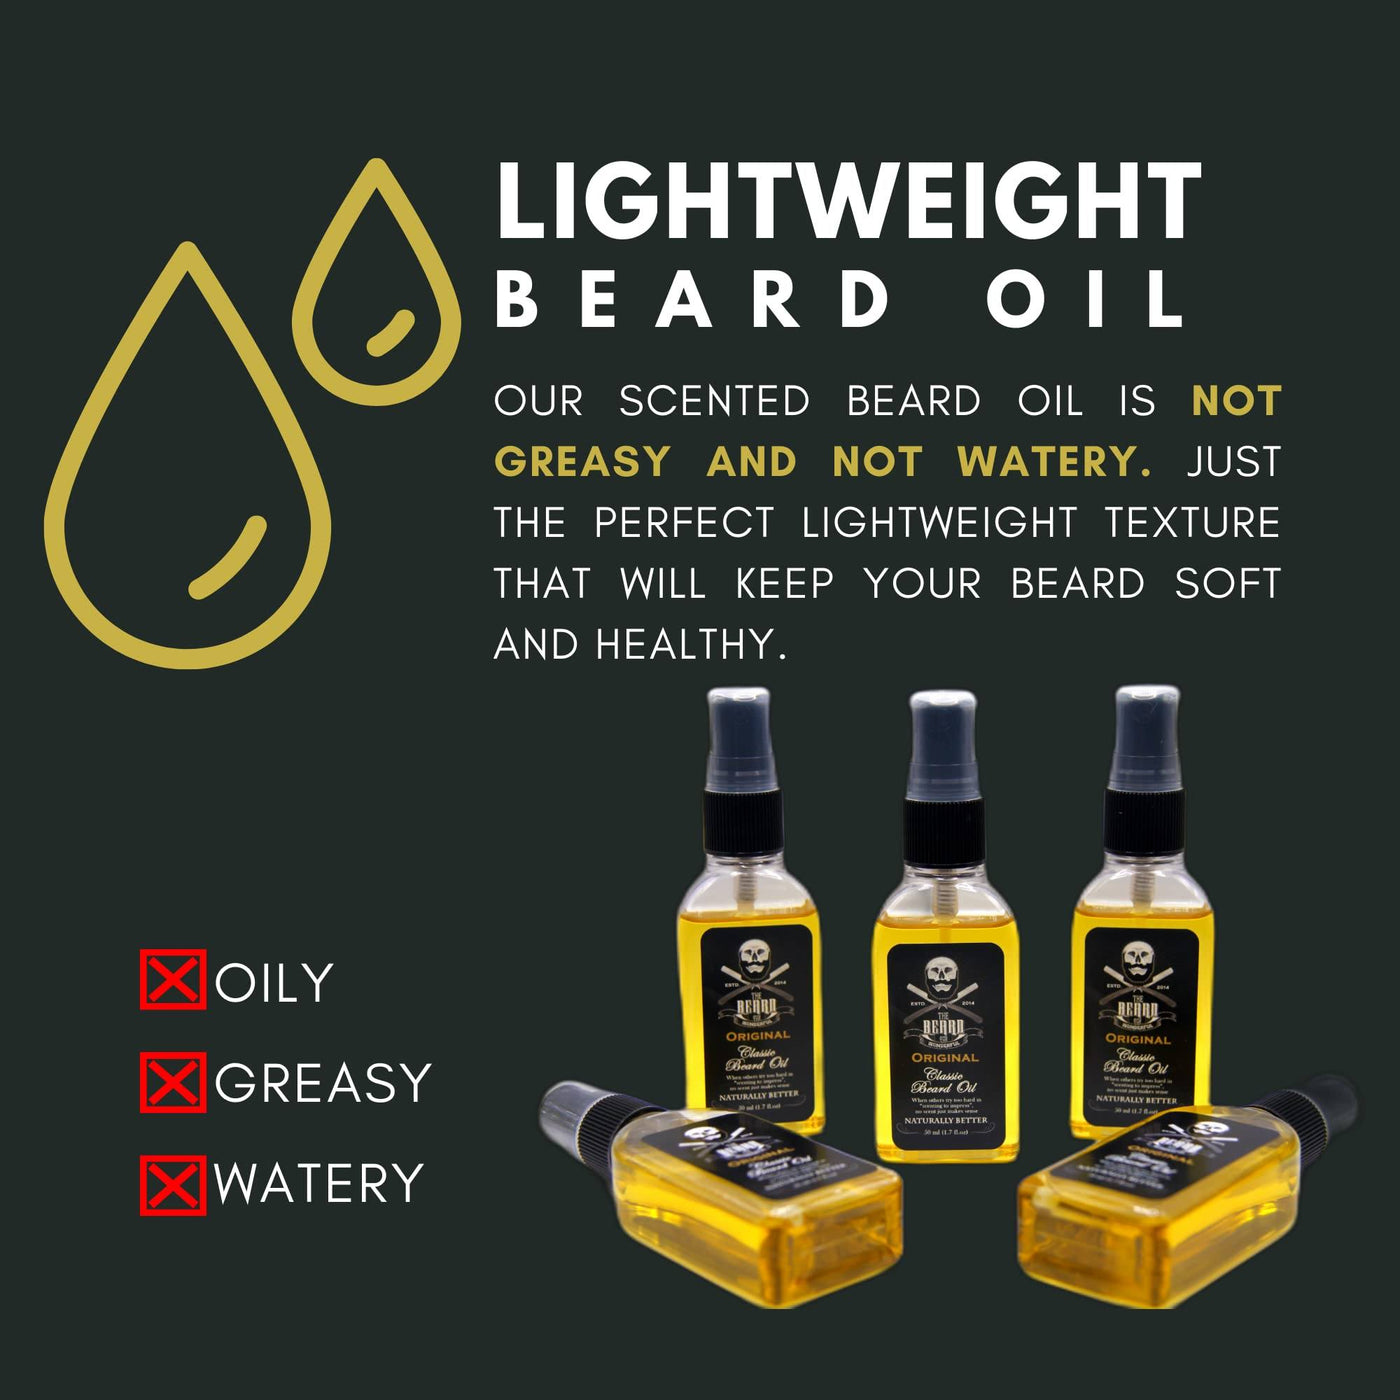 Classic Beard Oil 50ml (1.7 Fl Oz) Bottle Conditioning, Strengthening, Softening, Revitalizing Blend (Natural and organic ingredients) Beard Oil The Beard and The Wonderful 